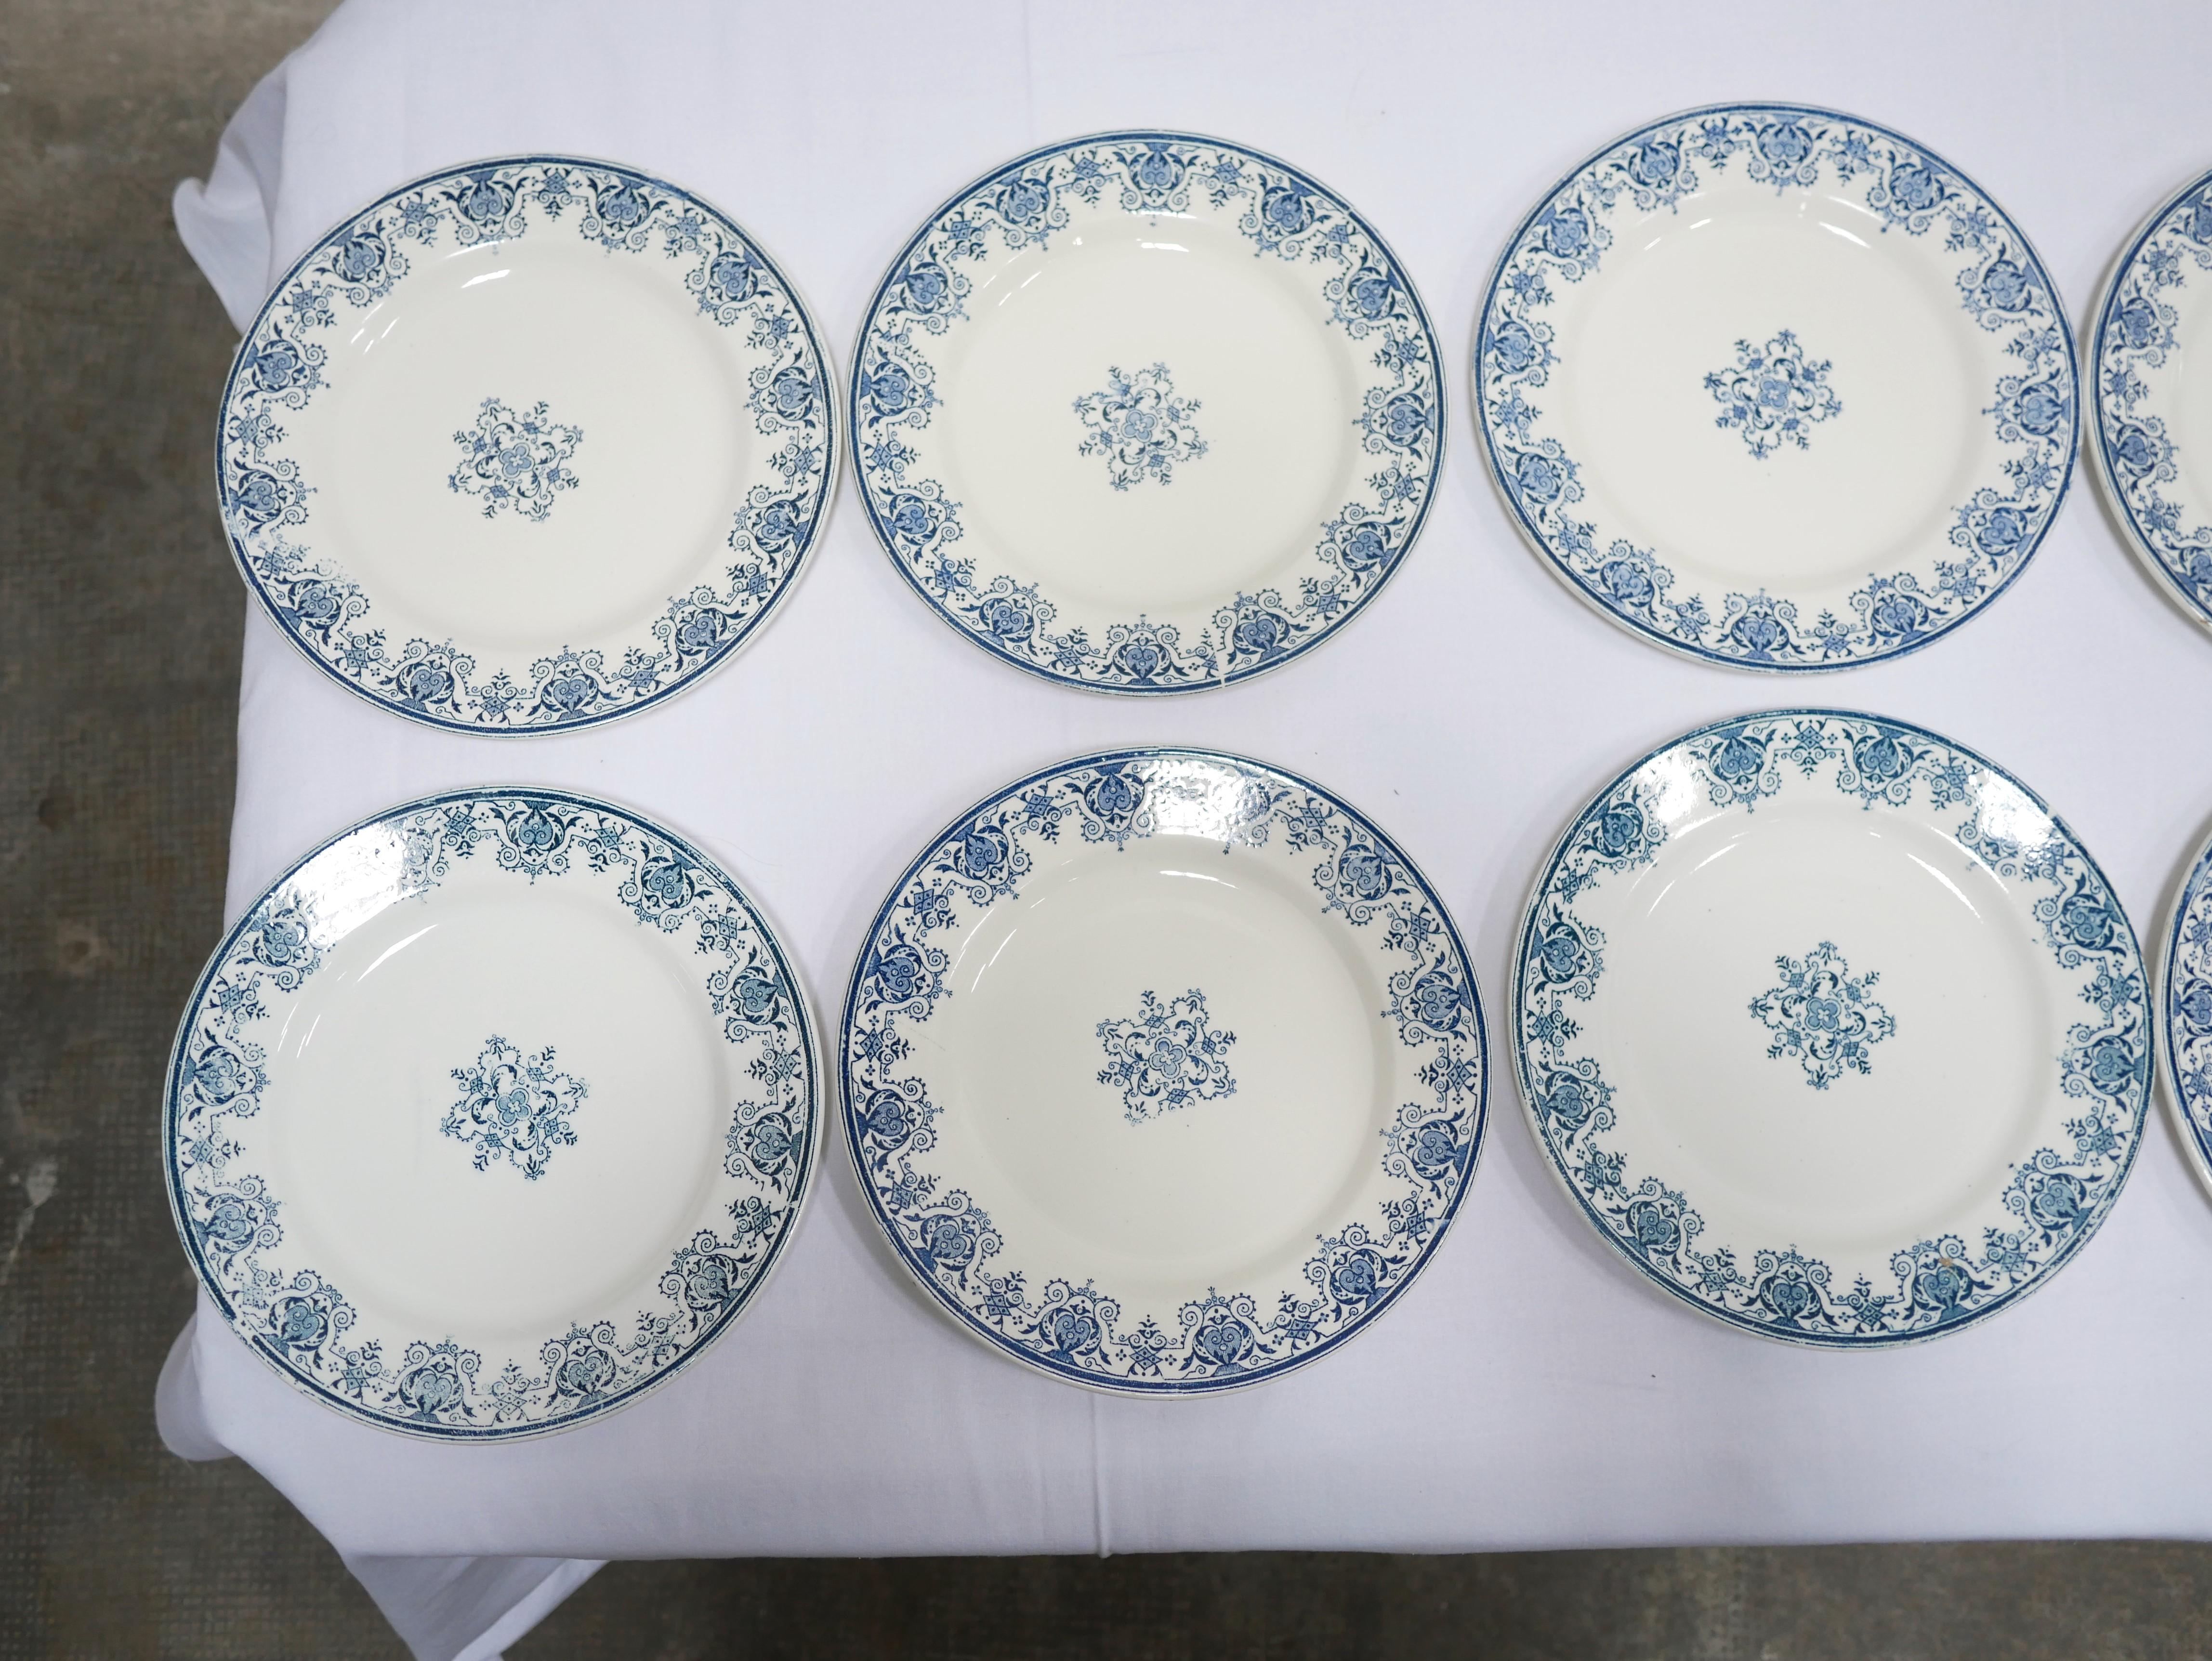 19th Century Series of 10 Old Terre De Fer Plates by L.G. for the Clairefontaine Earthenware For Sale